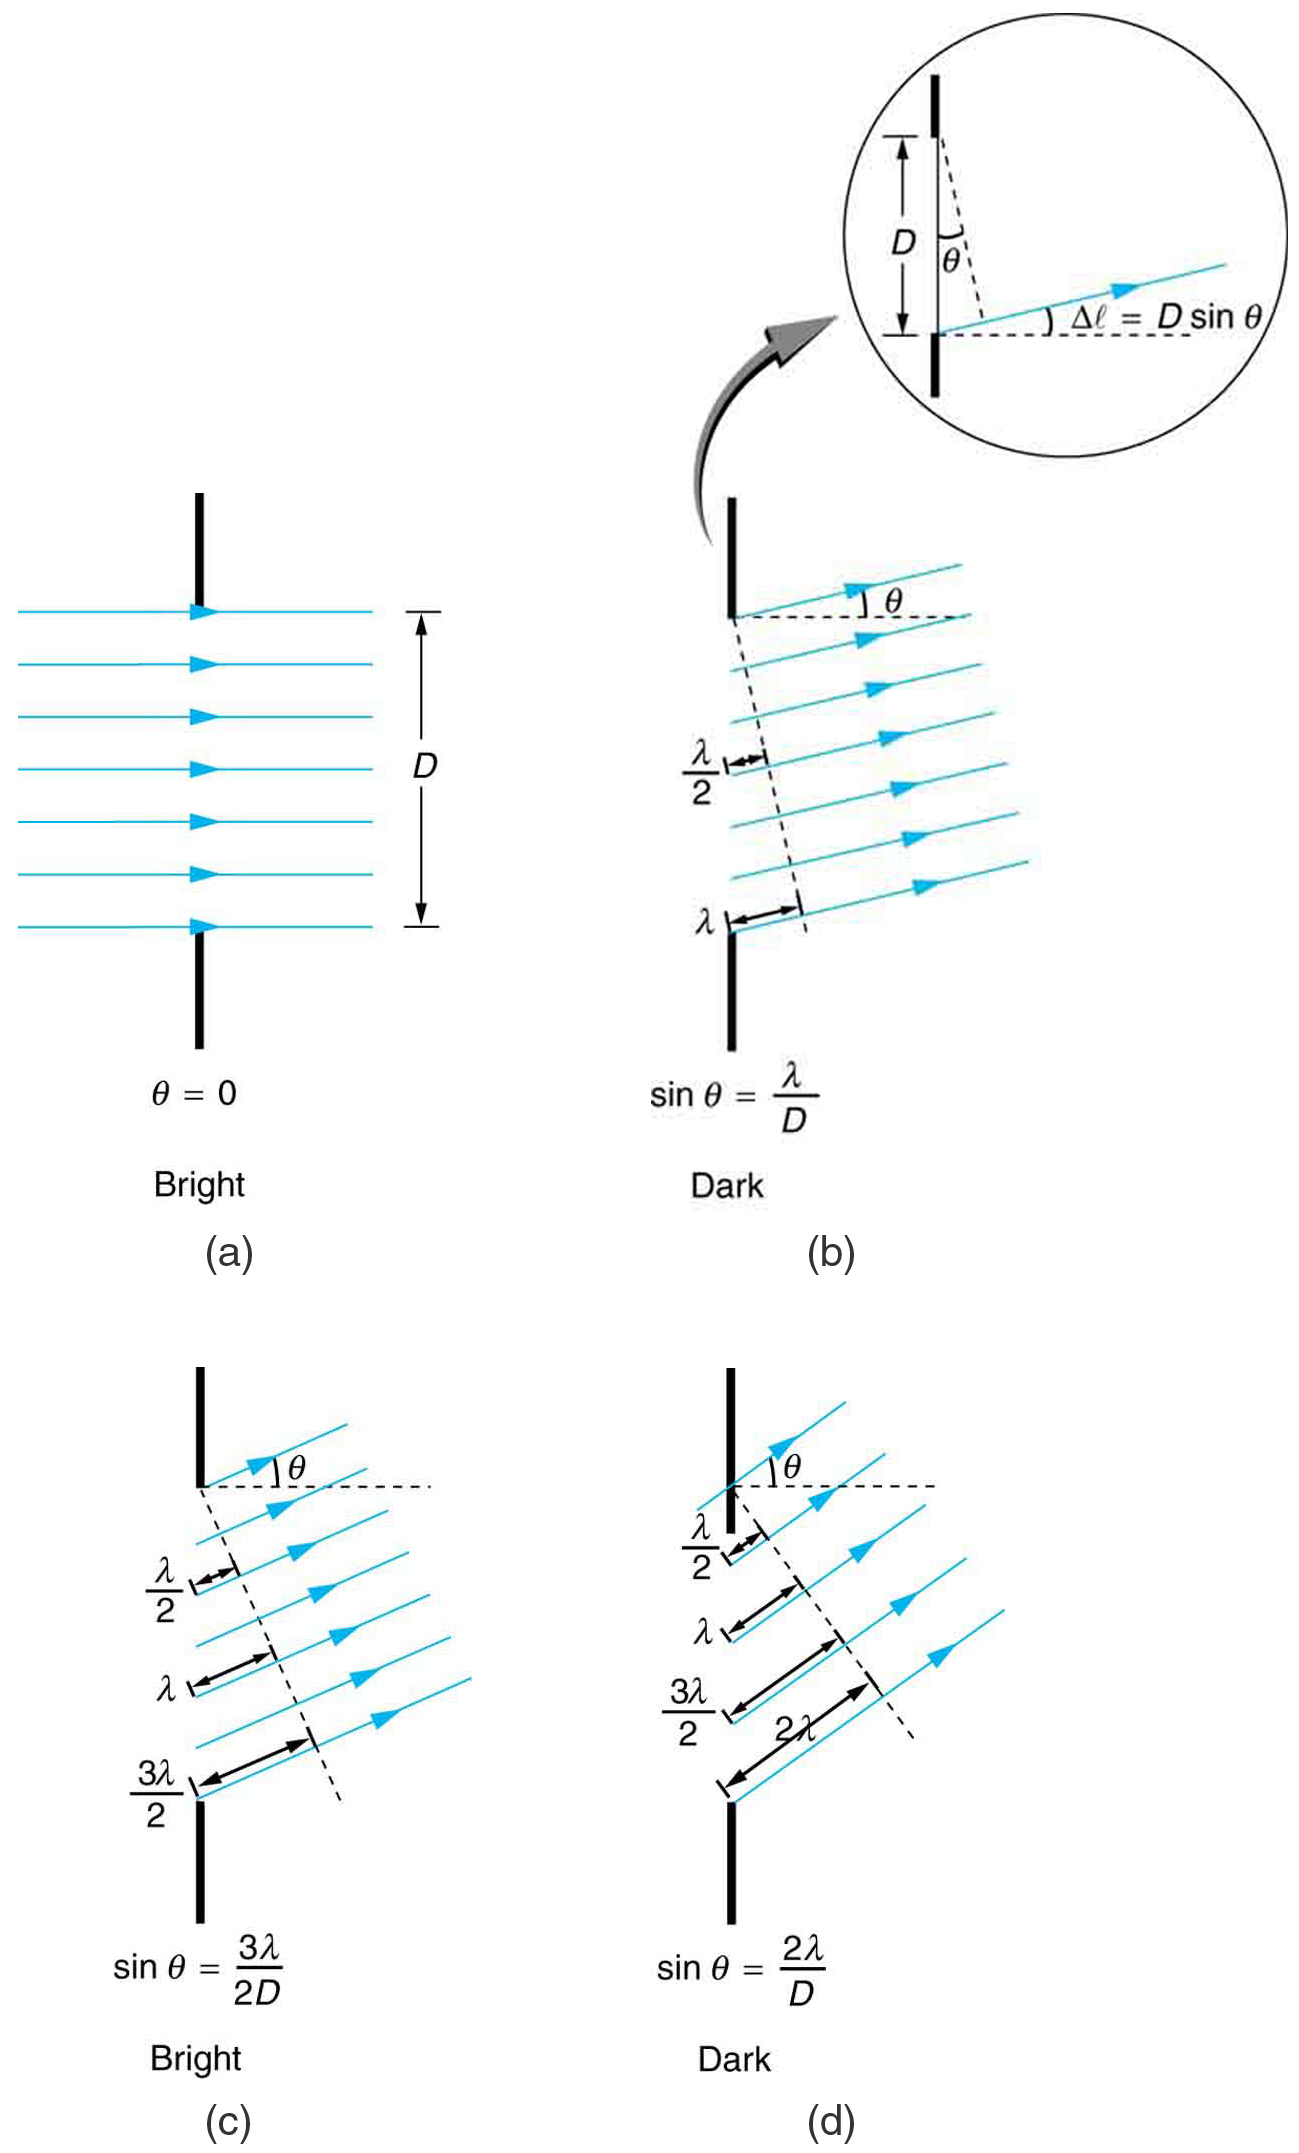 The figure shows four schematics of a ray bundle passing through a single slit. The slit is represented as a gap in a vertical line. In the first schematic, the ray bundle passes horizontally through the slit. This schematic is labeled theta equals zero and bright. The second schematic is labeled dark and shows the ray bundle passing through the slit an angle of roughly fifteen degrees above the horizontal. The path length difference between the top and bottom ray is lambda, and the schematic is labeled sine theta equals lambda over d. The third schematic is labeled bright and shows the ray bundle passing through the slit at an angle of about twenty five degrees above the horizontal. The path length difference between the top and bottom rays is three lambda over two d, and the schematic is labeled sine theta equals three lambda over two d. The final schematic is labeled dark and shows the ray bundle passing through the slit at an angle of about forty degrees above the horizontal. The path length difference between the top and bottom rays is two lambda over d, and the schematic is labeled sine theta equals two lambda over d.